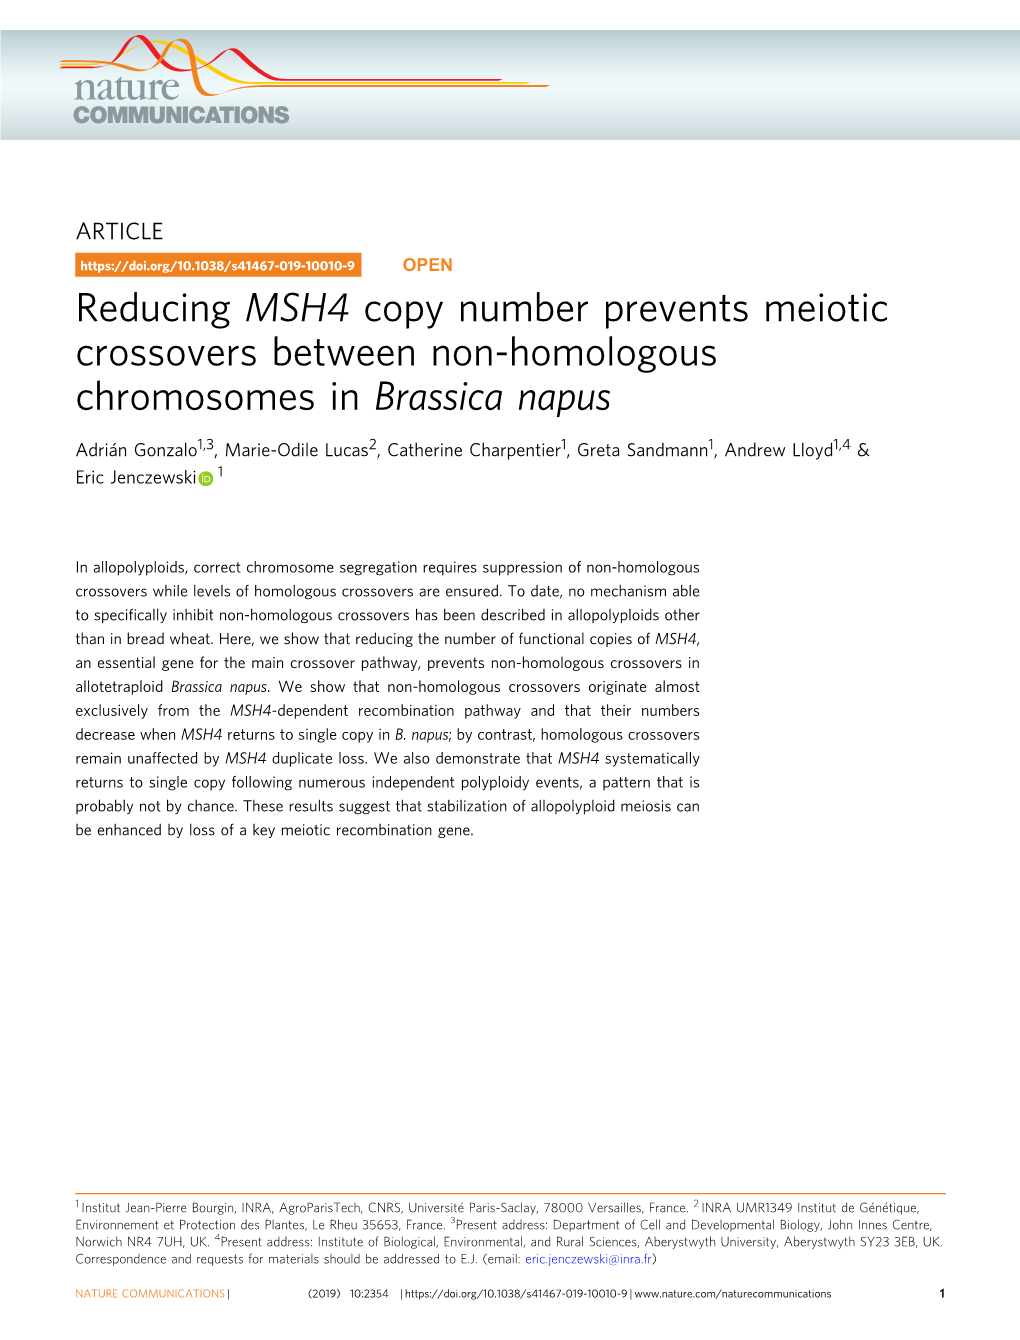 Reducing MSH4 Copy Number Prevents Meiotic Crossovers Between Non-Homologous Chromosomes in Brassica Napus